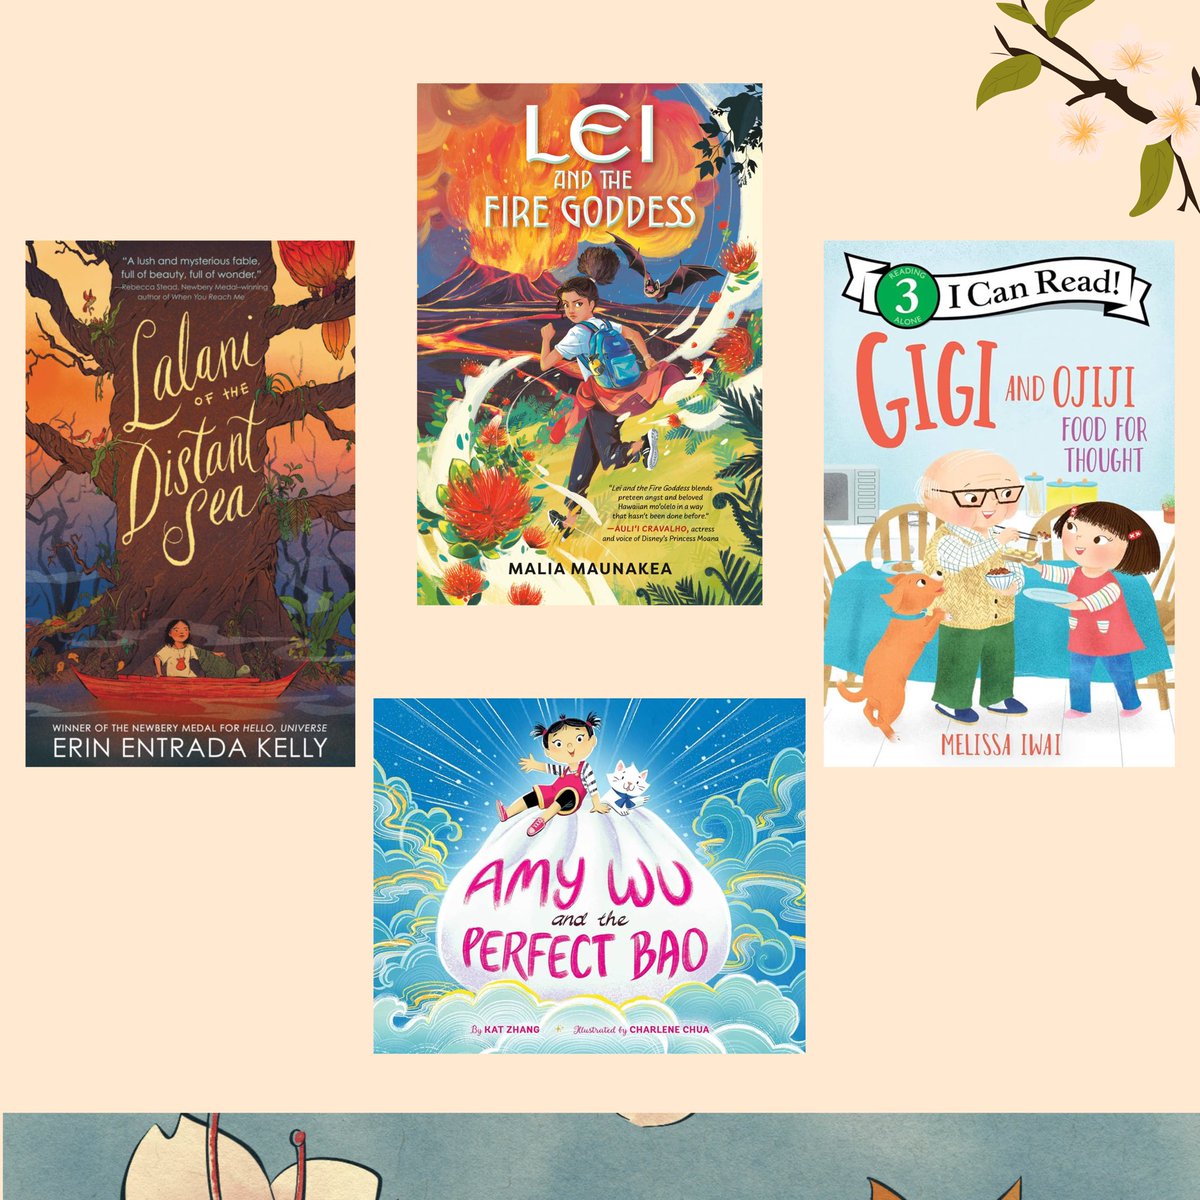 Here’s a short list of incredible books that you should check out in celebration of Asian American & Pacific Islander month! 📚 Share some of your book suggestions for AAPI month with us in the comments. We’d love to hear them. ⬇️